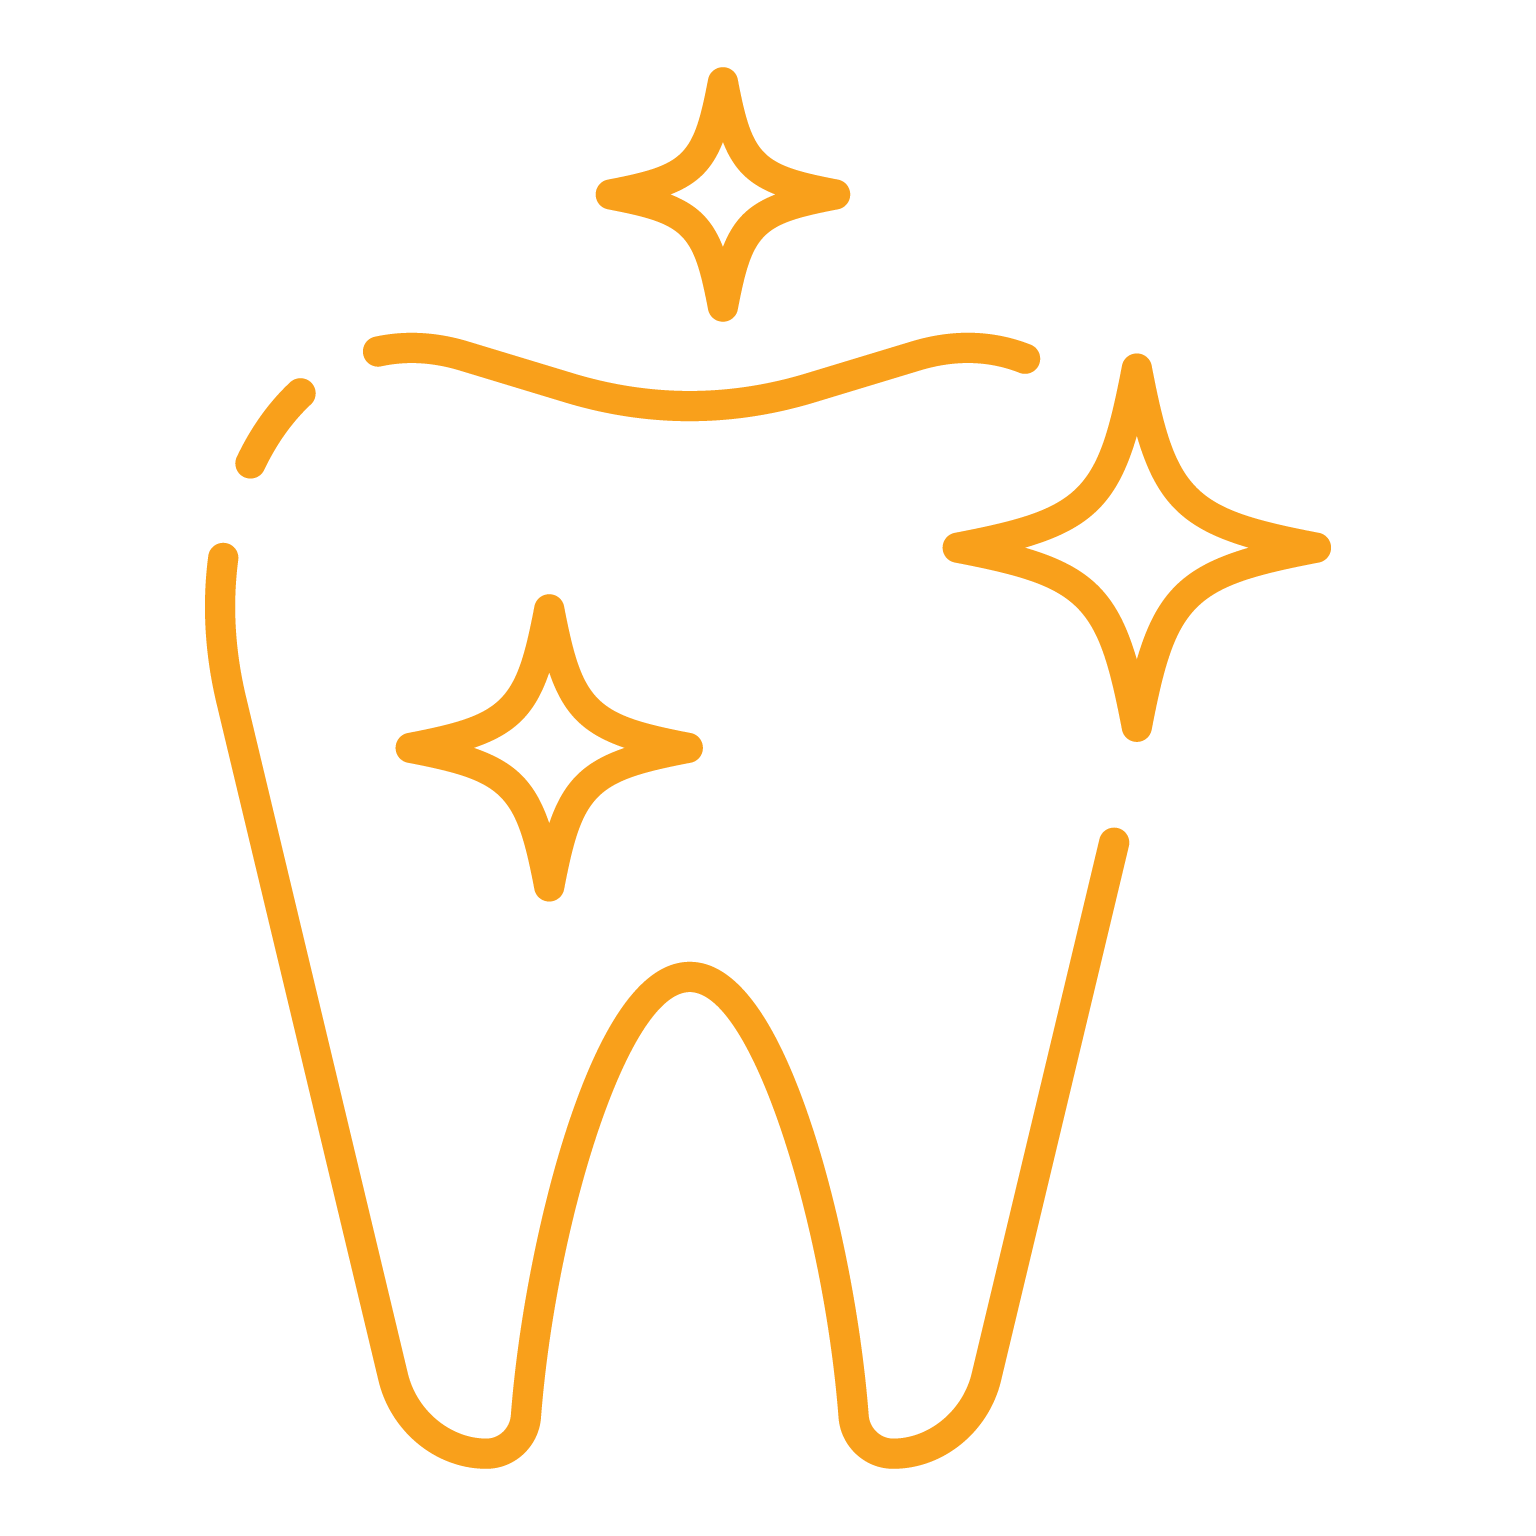 Icon of a healthy tooth, symbolizing the focus on dental health and preventative care at Dr. Kevin Burgdorf's office.